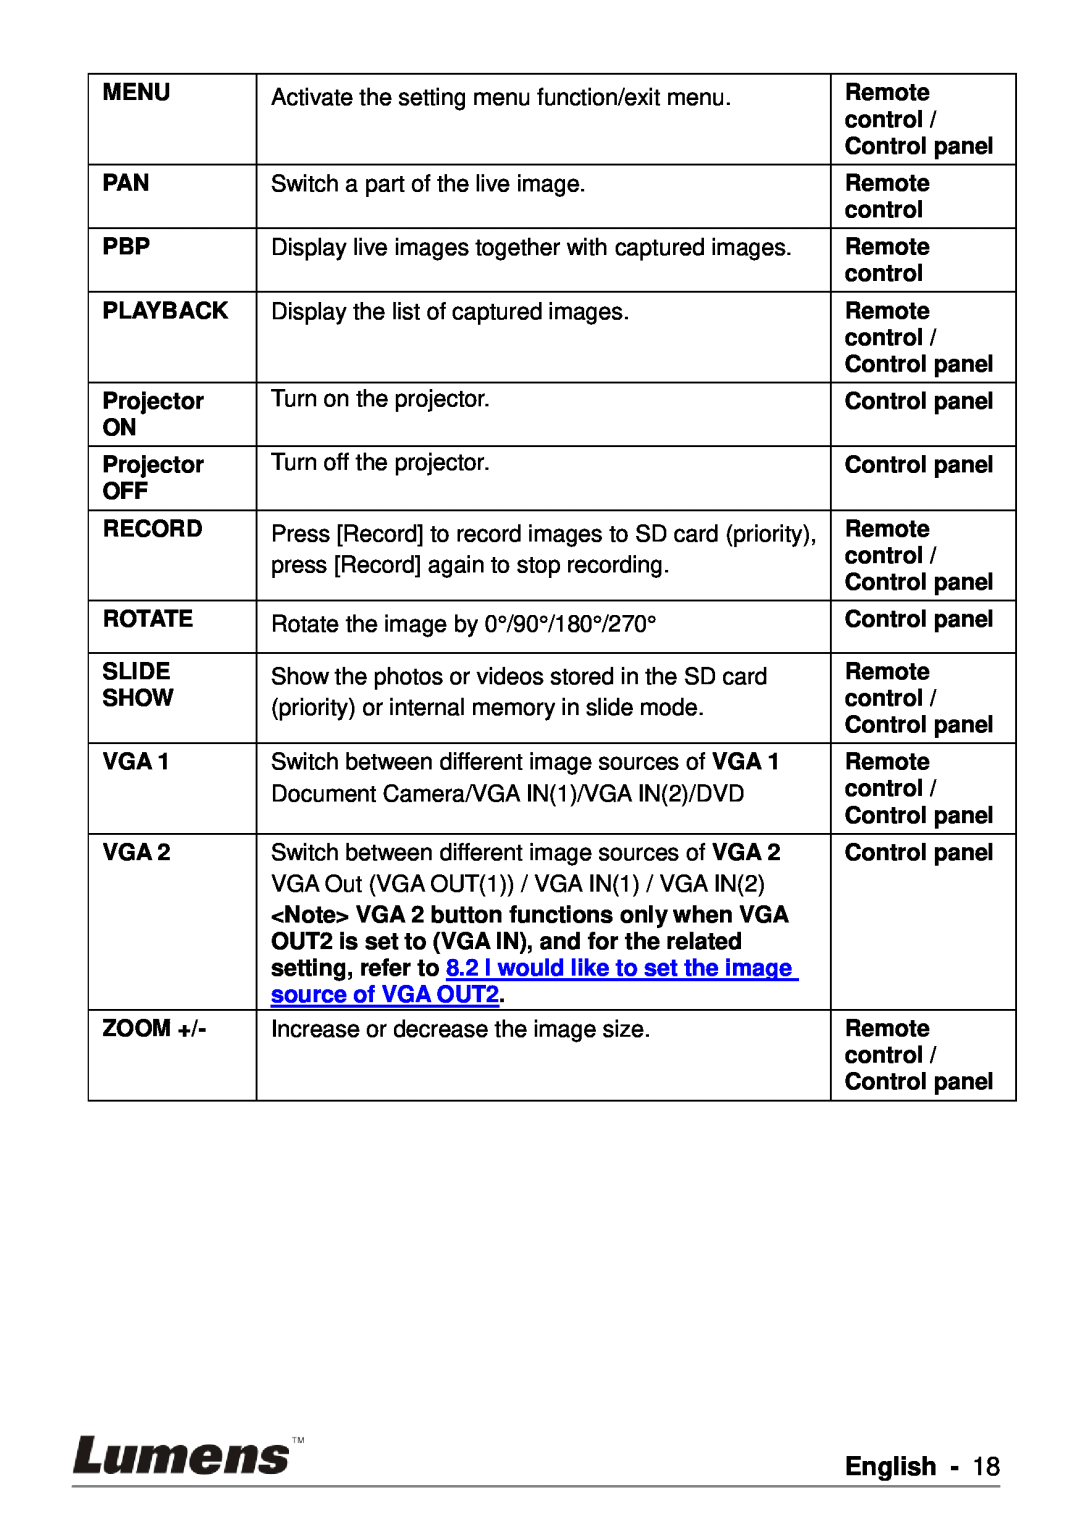 Lumens Technology PS750 user manual English, setting, refer to 8.2 I would like to set the image, source of VGA OUT2 